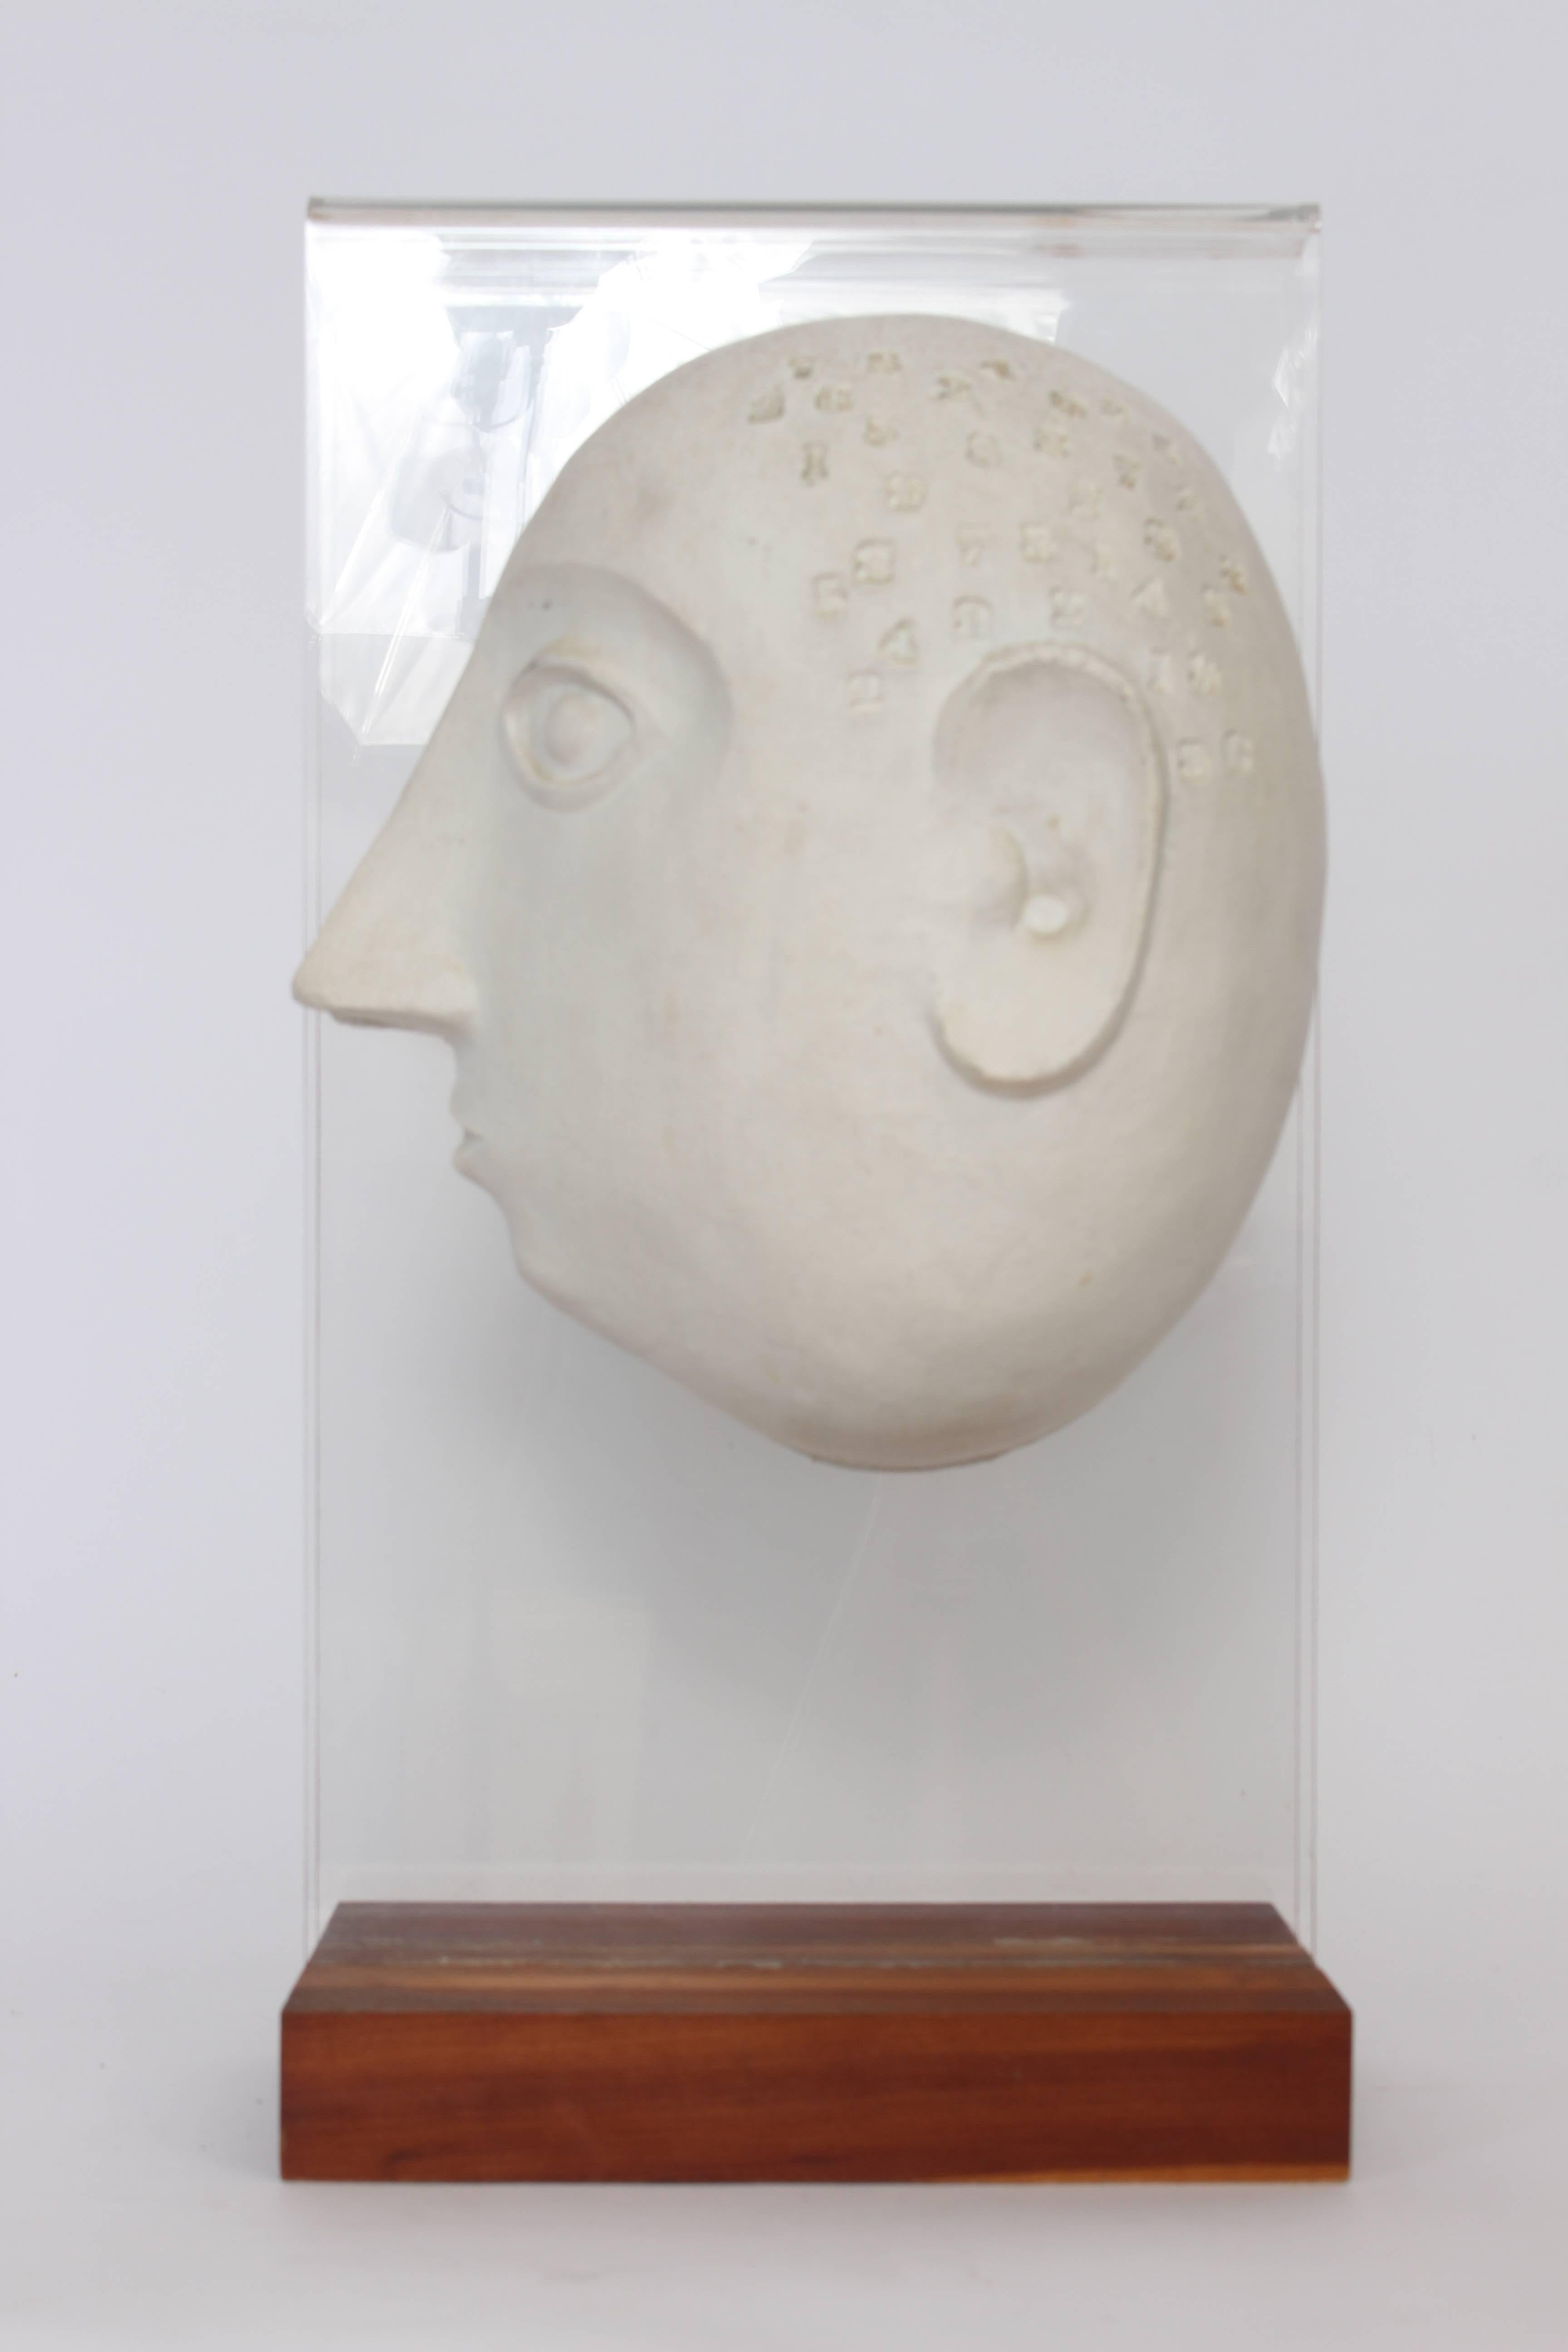 Psychological portrait of a man in Ceramic, Lucite and Wood, 1949, by Bennington Potters Founder, David Gil.  The split male profile Caricature in Off-White Ceramic features stamped numbers with Lucite support and rectangular wooden base. (Base 10 x